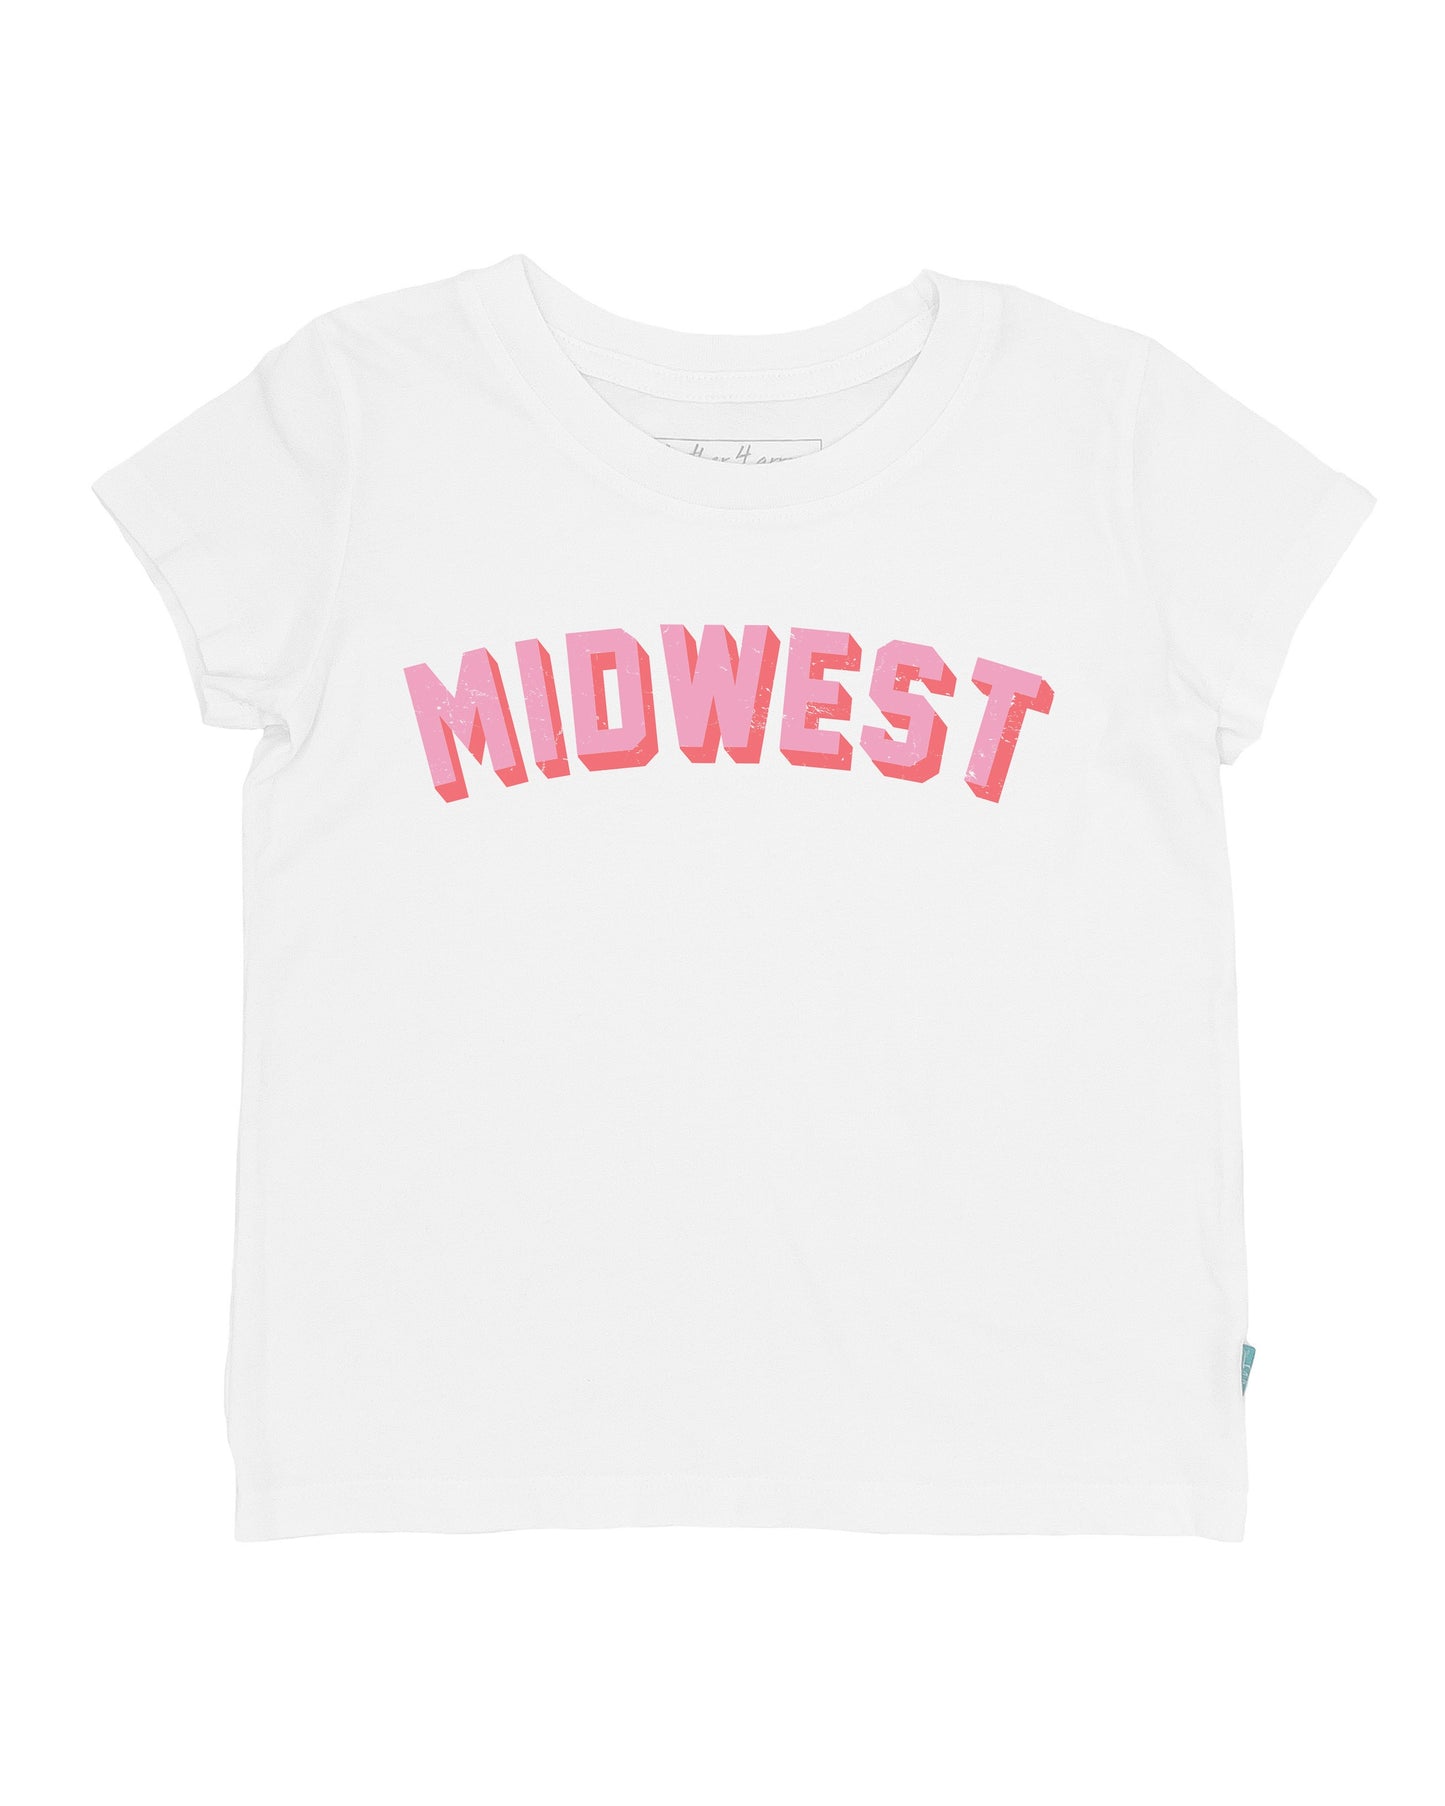 MIDWEST EVERYDAY TEE